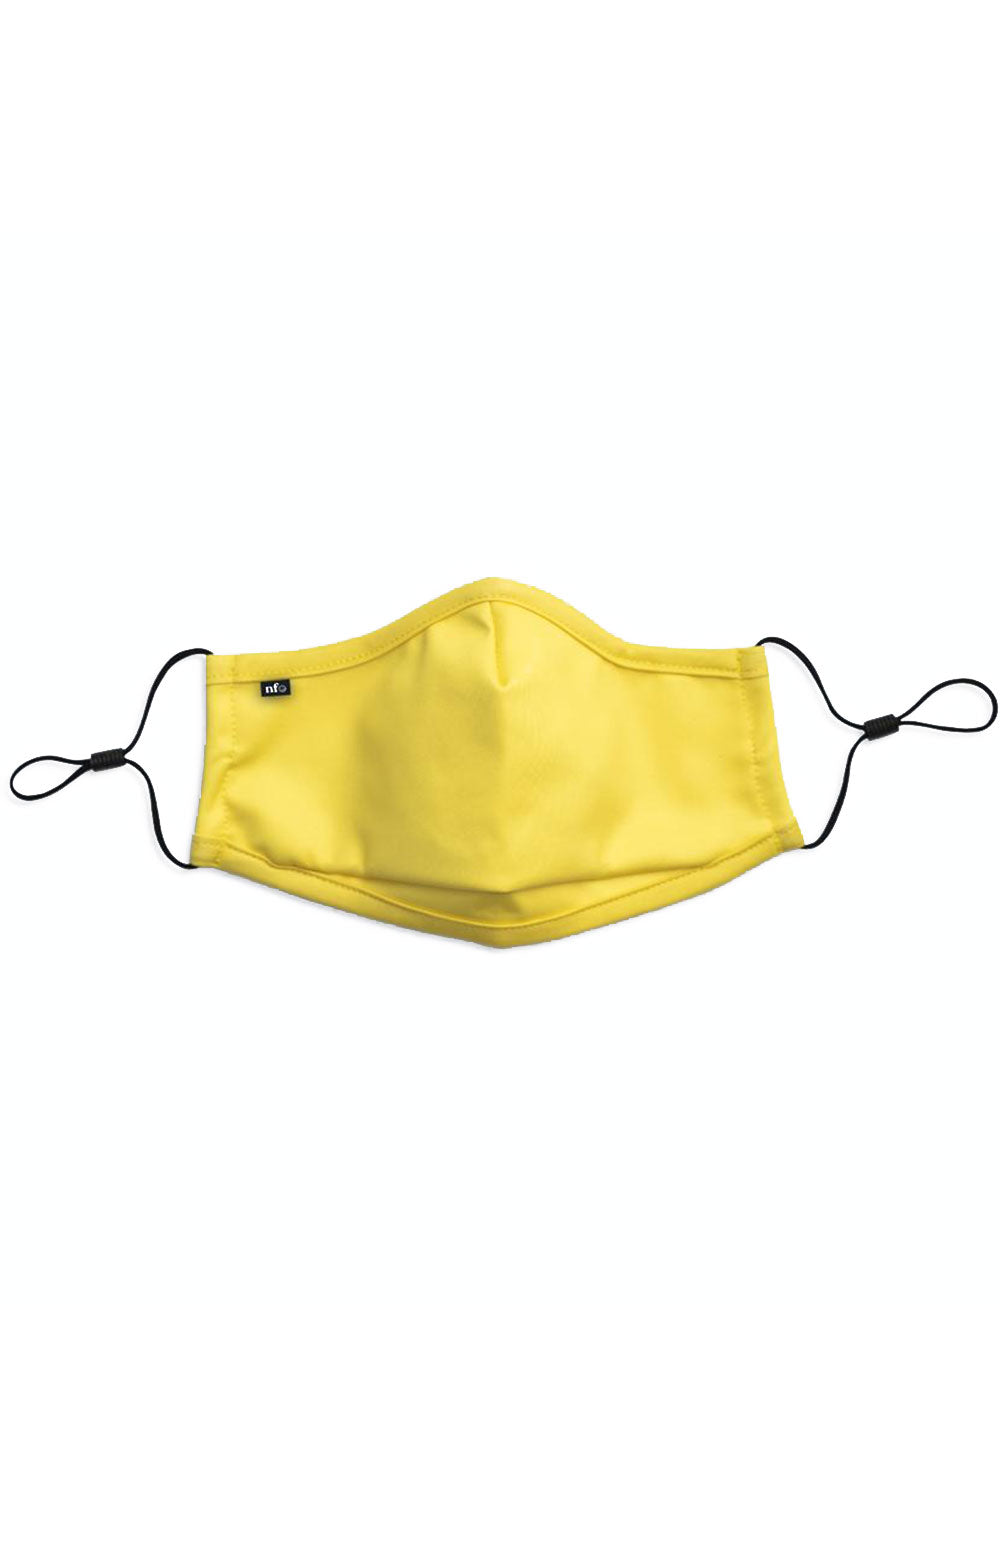 Kids Anti Bacterial Knit Face Mask - Yellow